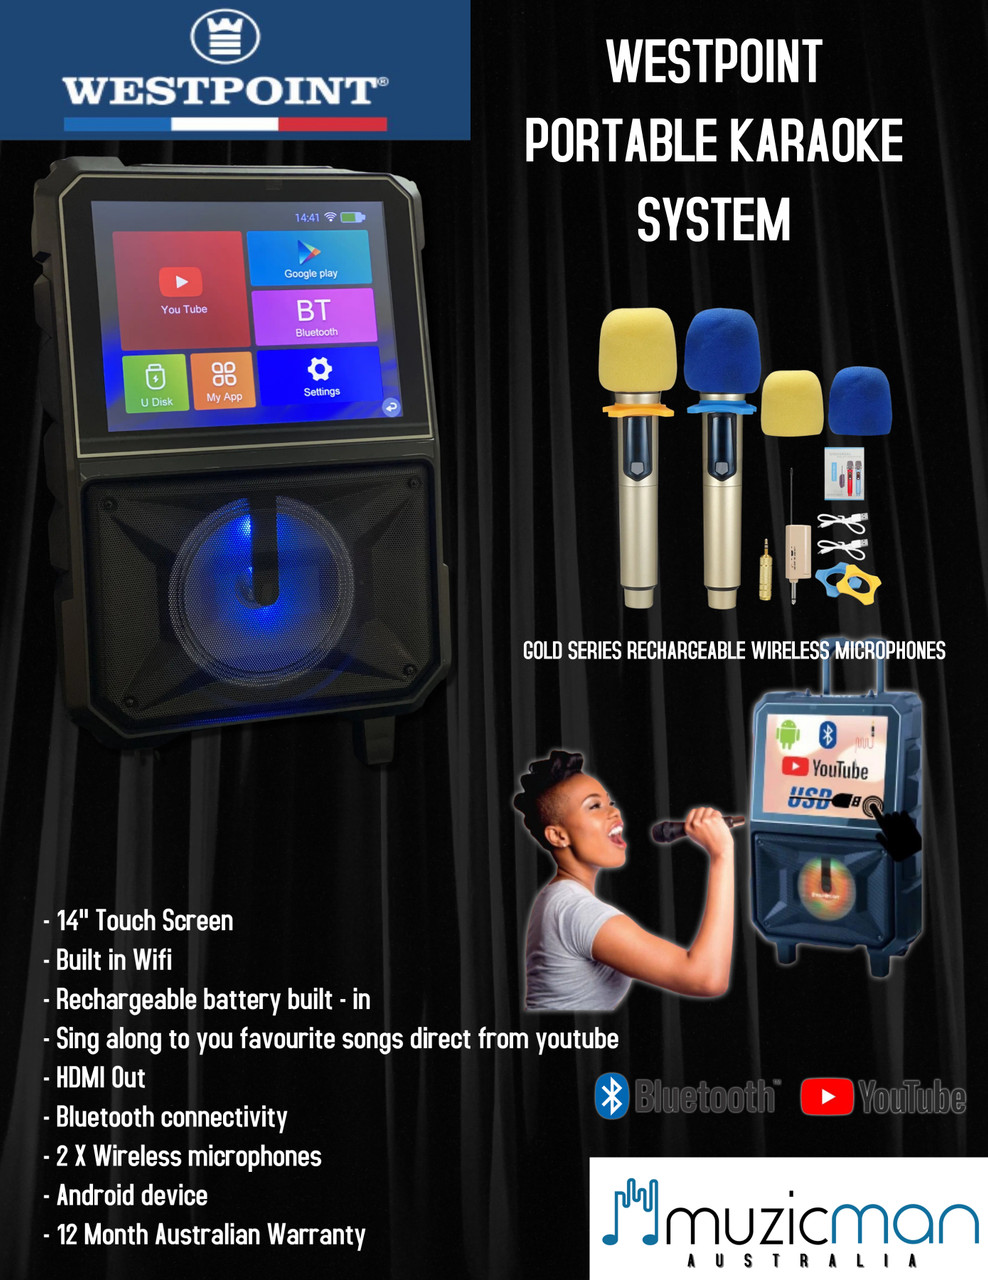 Westpoint Karaoke Touch Video Screen WiFi/Bluetooth Portable Sound system INCL 2 Wireless Microphones Rechargable Battery- Upgraded Android 7.1.2